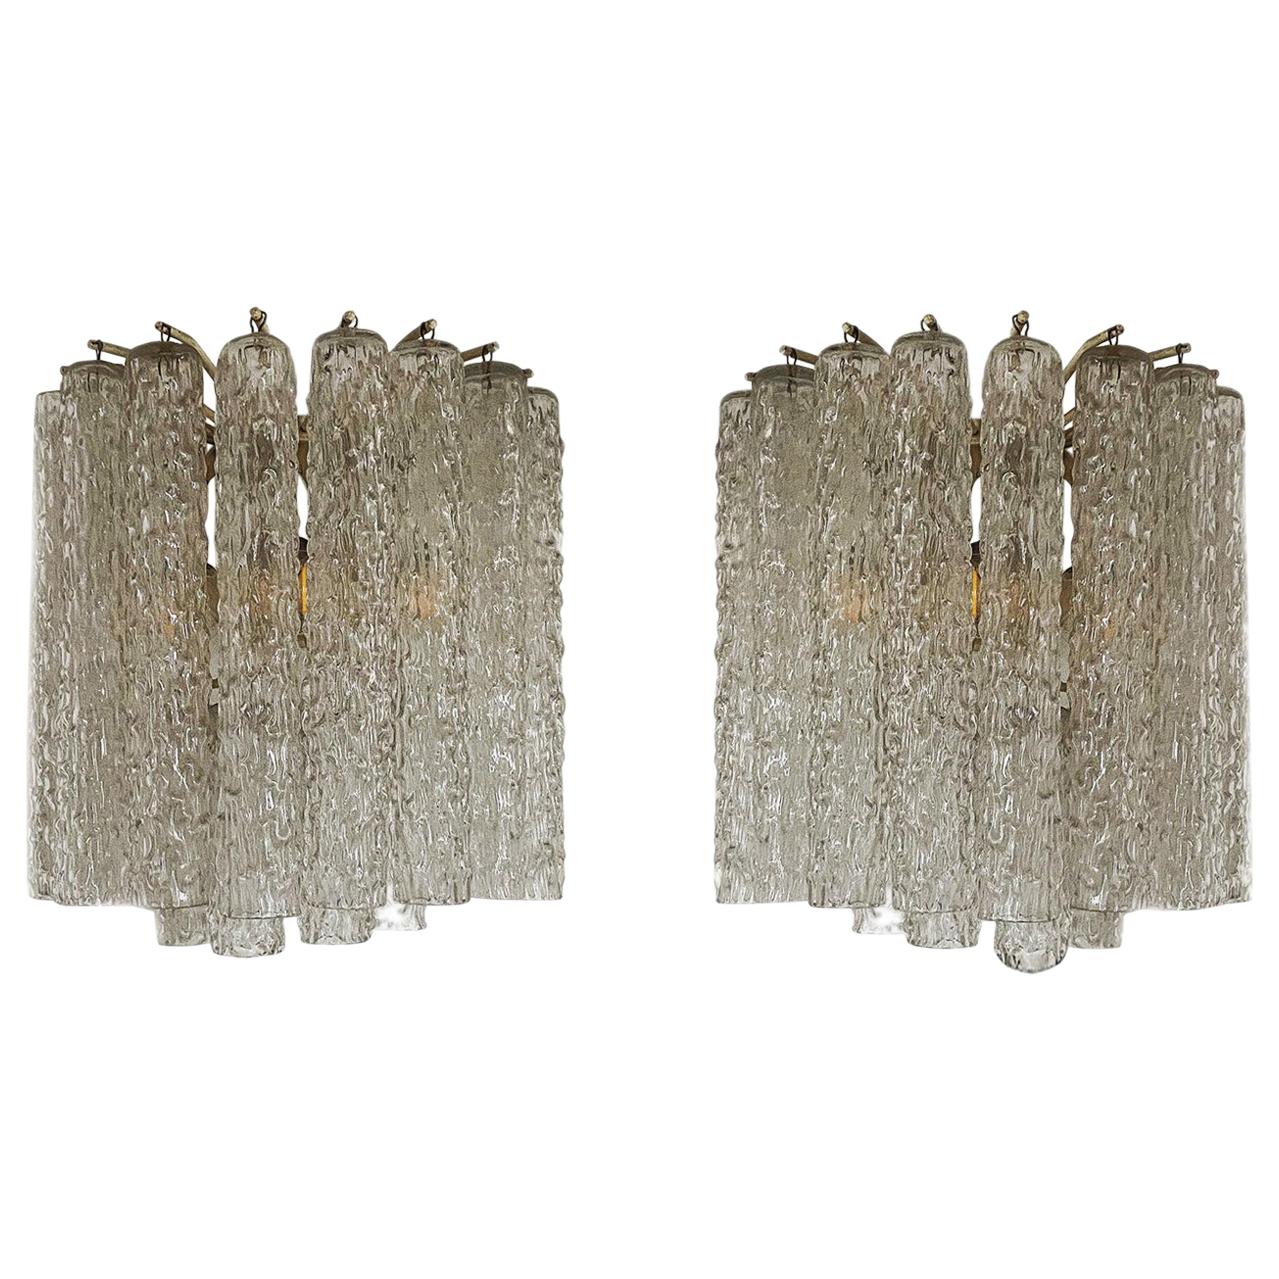 Pair of vintage italian made sconces in Murano glass by Toni Zuccheri for Venini